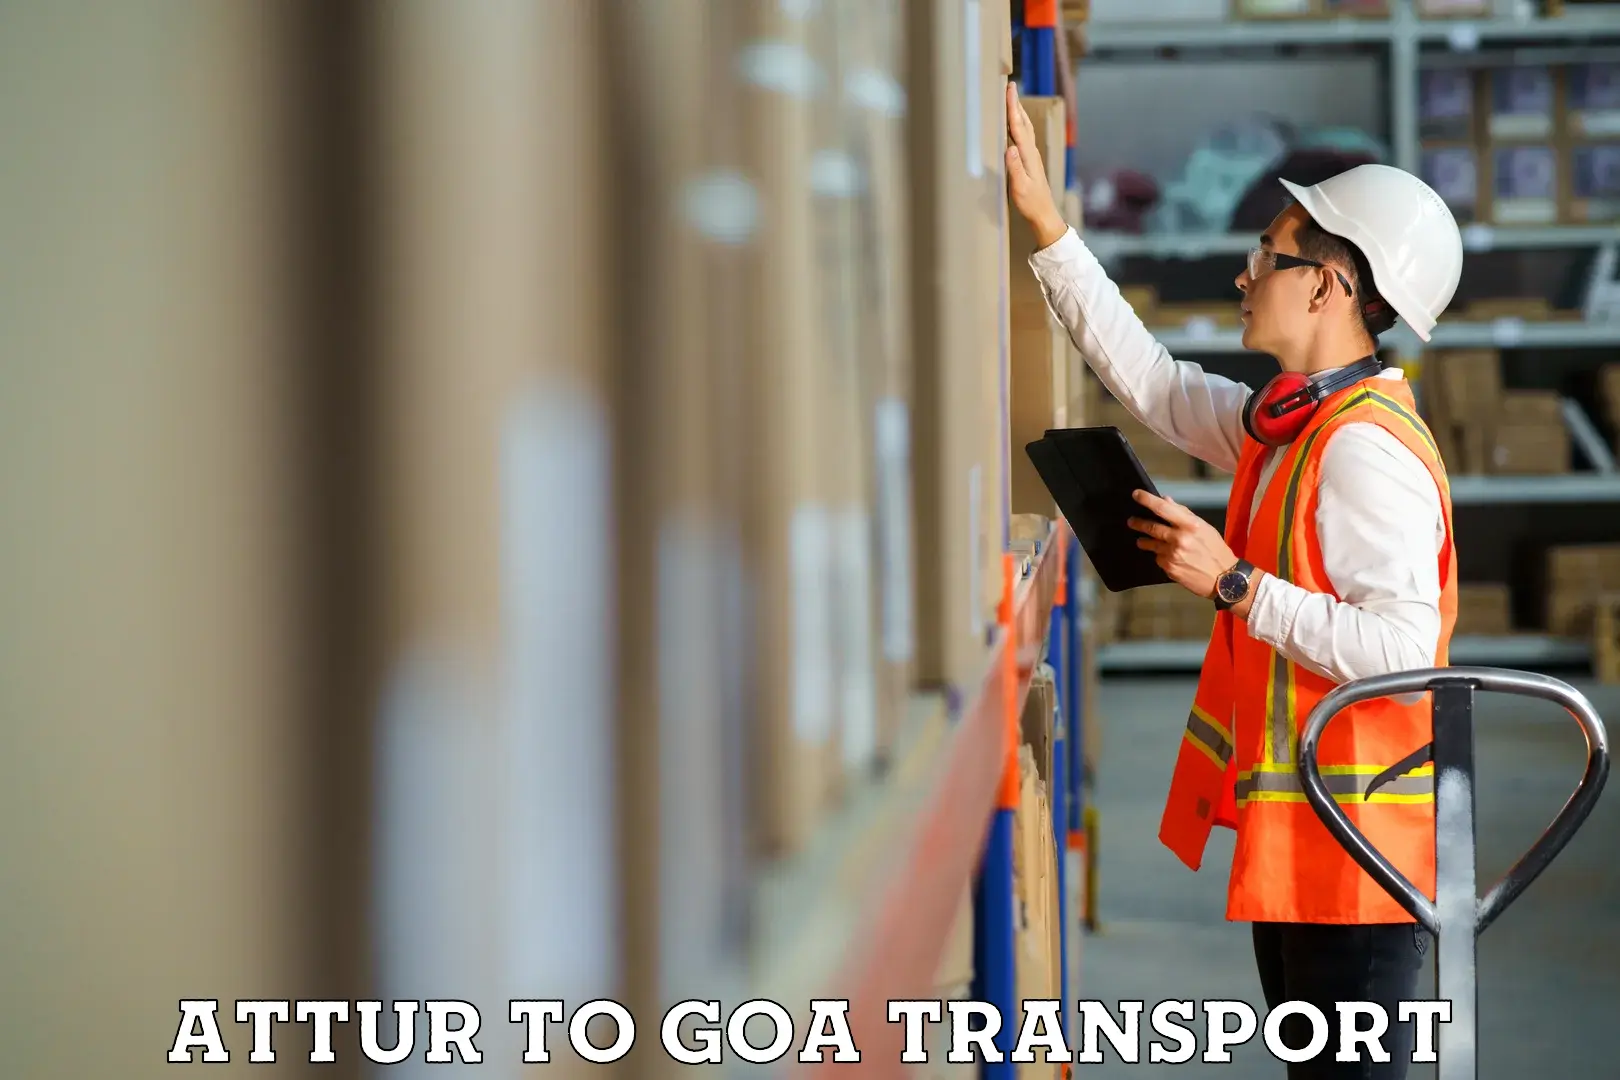 Container transport service Attur to IIT Goa